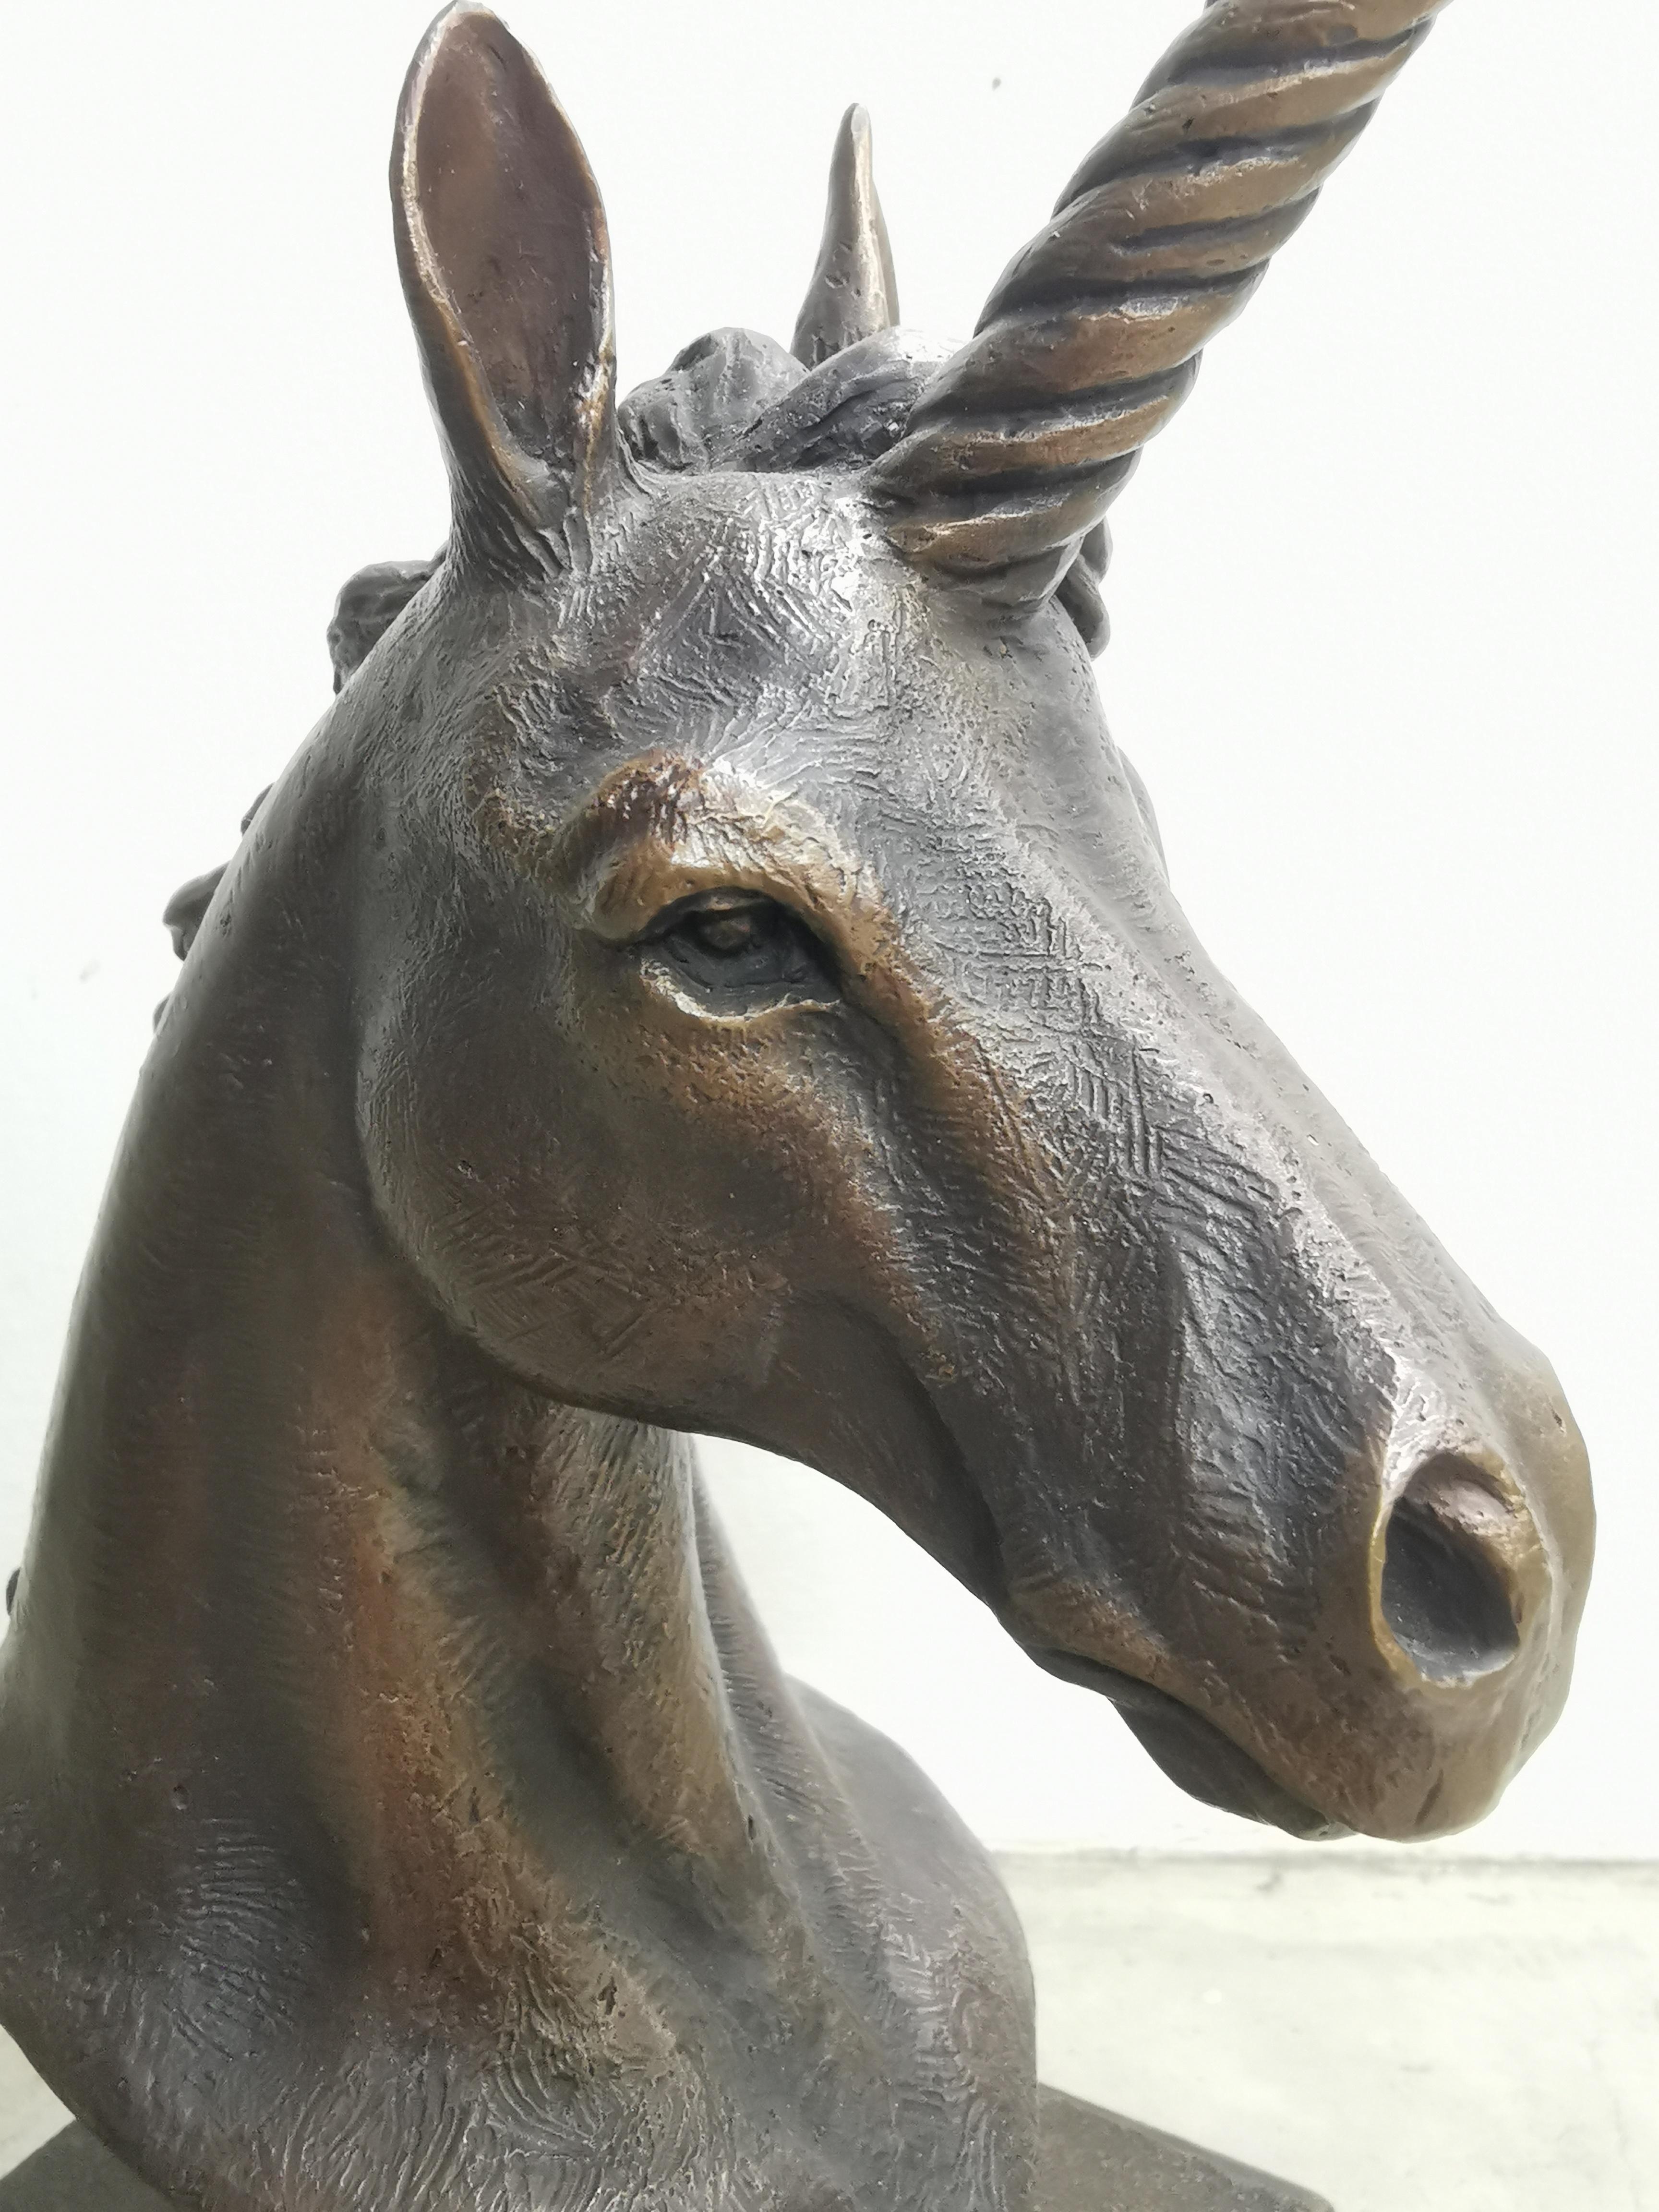 A small, limited edition bronze unicorn bust sculpture on a wooden base. Edition of 12.
FREE SHIPPING